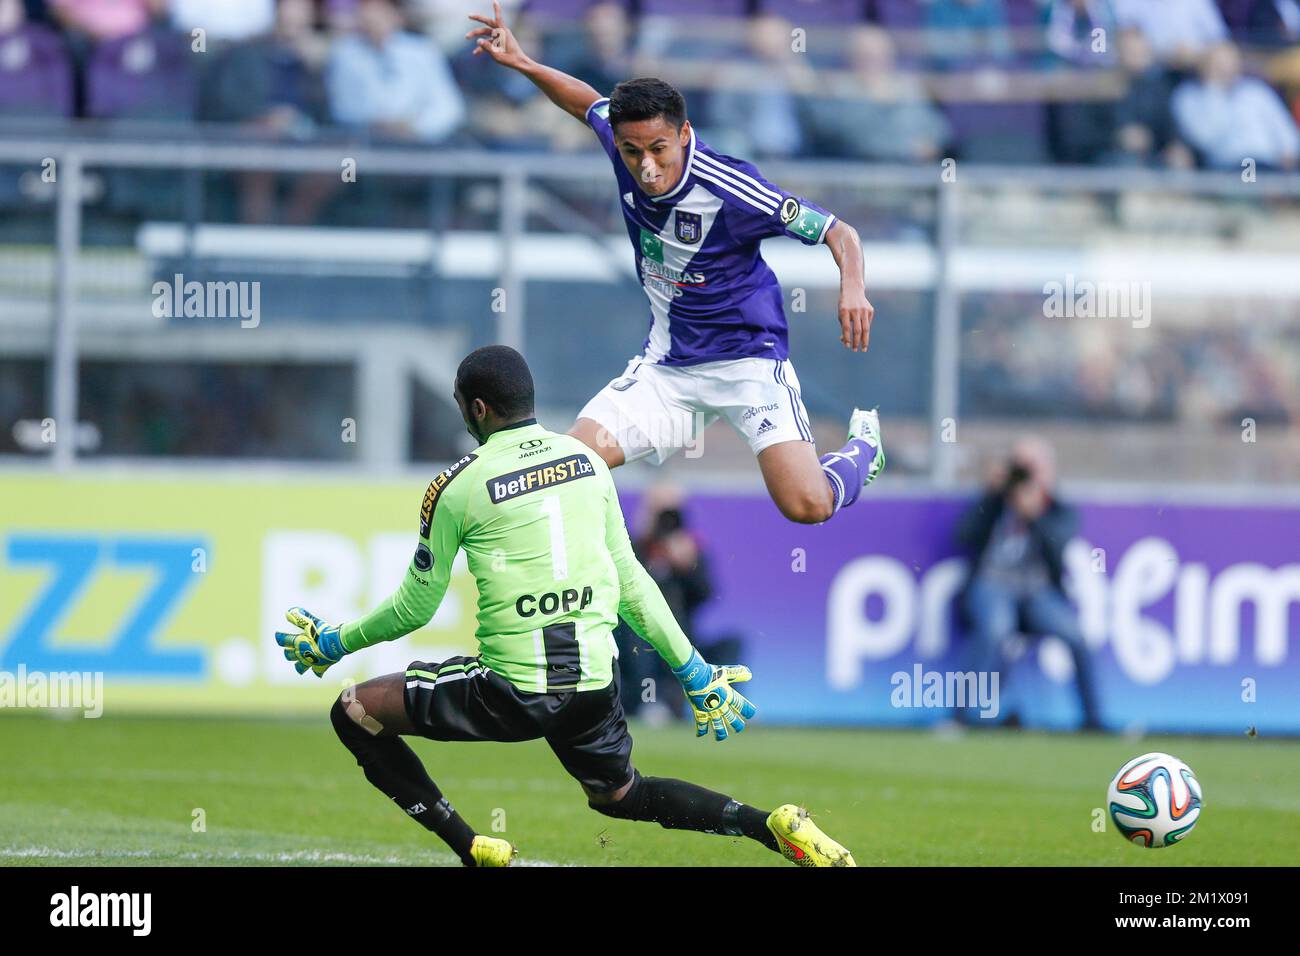 20141101 - BRUSSELS, BELGIUM: Lokeren's goalkeeper Barry Boubacar Copa and Anderlecht's Andy Najar fight for the ball during the Jupiler Pro League match between RSC Anderlecht and Lokeren, in Brussels, Saturday 01 November 2014, on day 14 of the Belgian soccer championship. BELGA PHOTO BRUNO FAHY Stock Photo